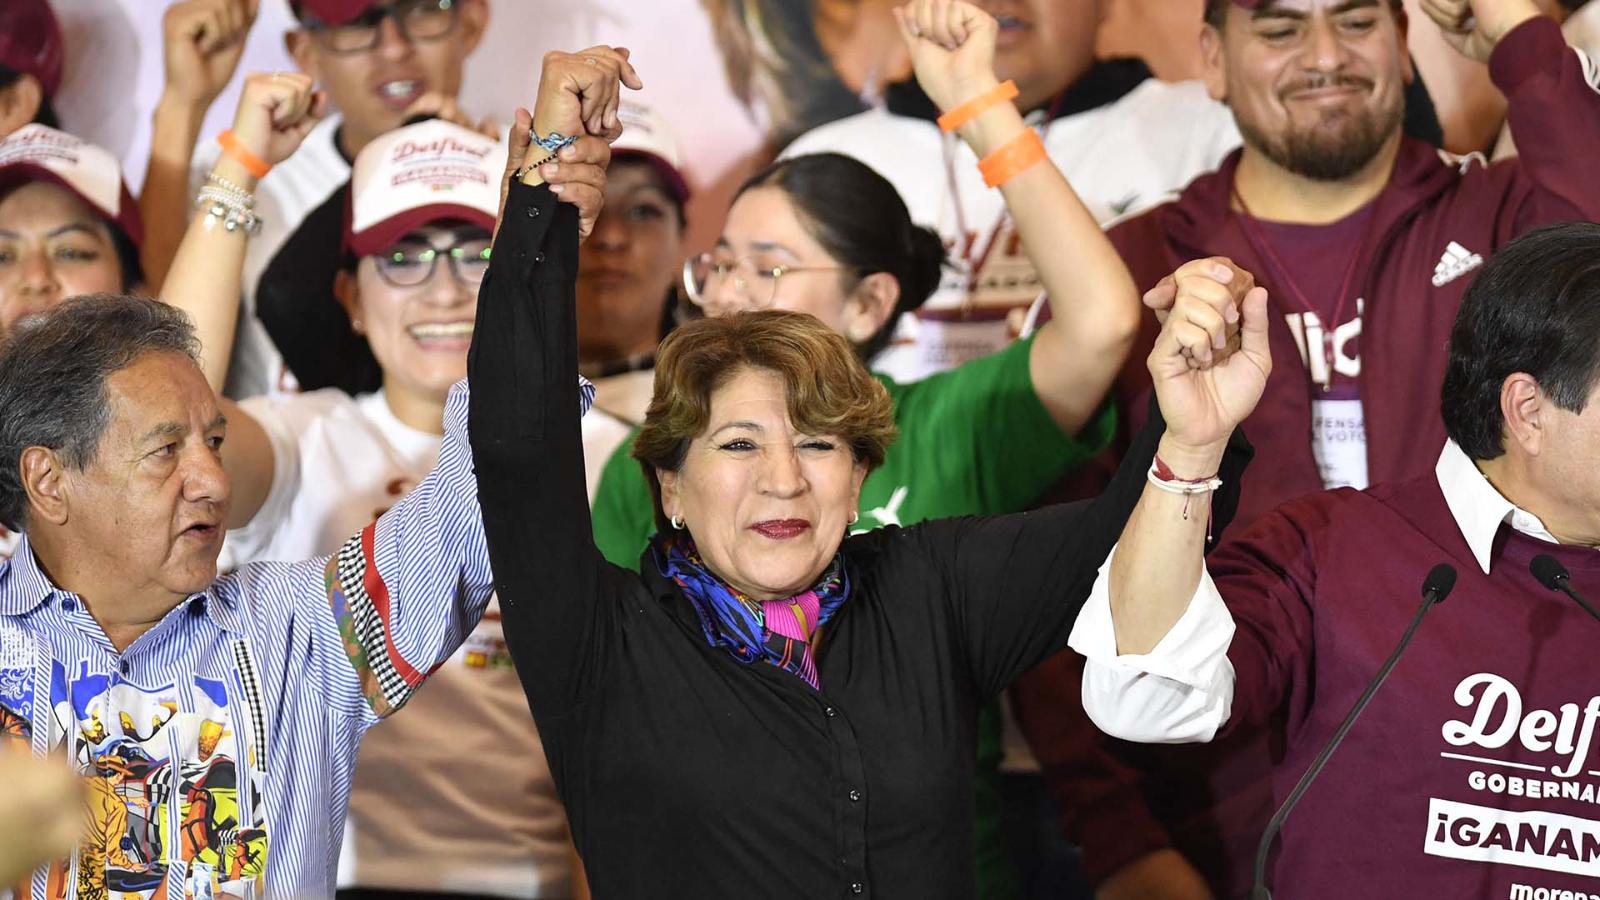 Delfina Gómez, of the Together We Make History coalition, is leading the election for governor of the state of Mexico